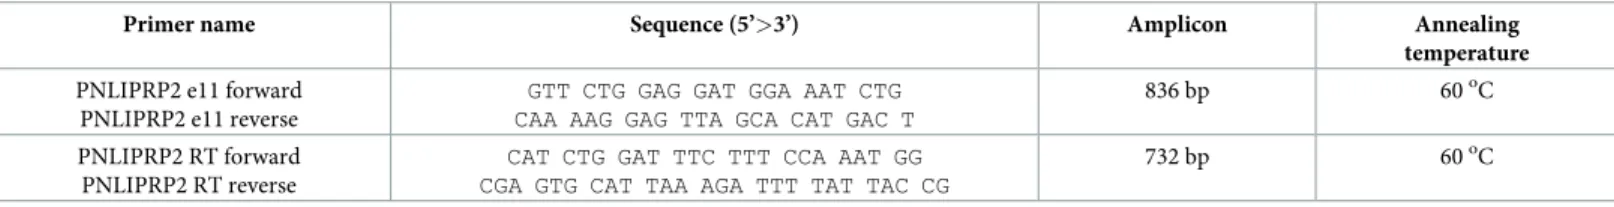 Table 3. Oligonucleotide primers used for PCR amplification of exon 11 of PNLIPRP2 from genomic DNA (e11 primers) and a portion of the PNLIPRP2 coding sequence from pancreatic cDNA (RT primers).